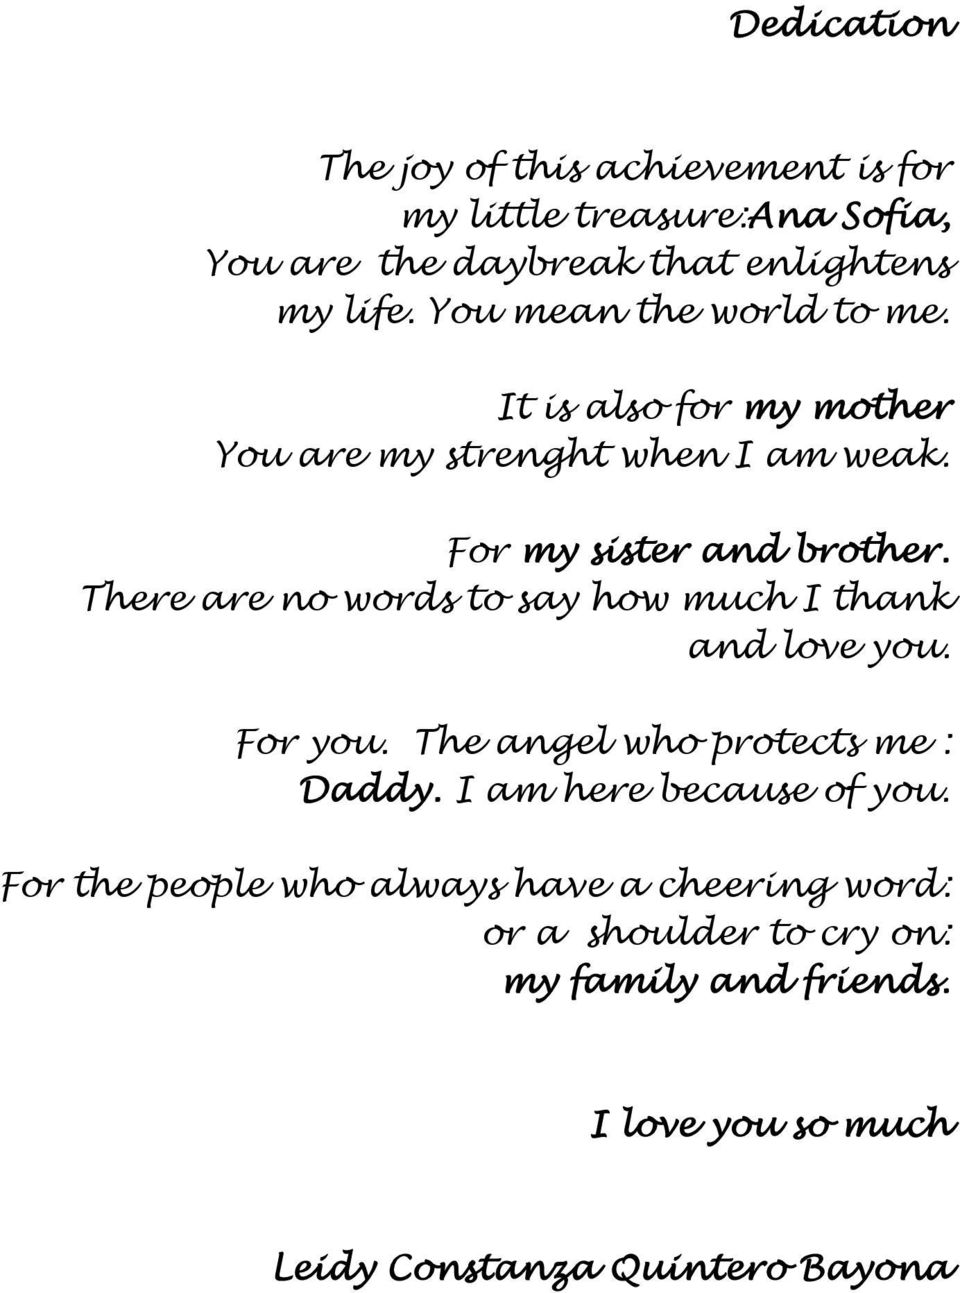 There are no words to say how much I thank and love you. For you. The angel who protects me : Daddy. I am here because of you.